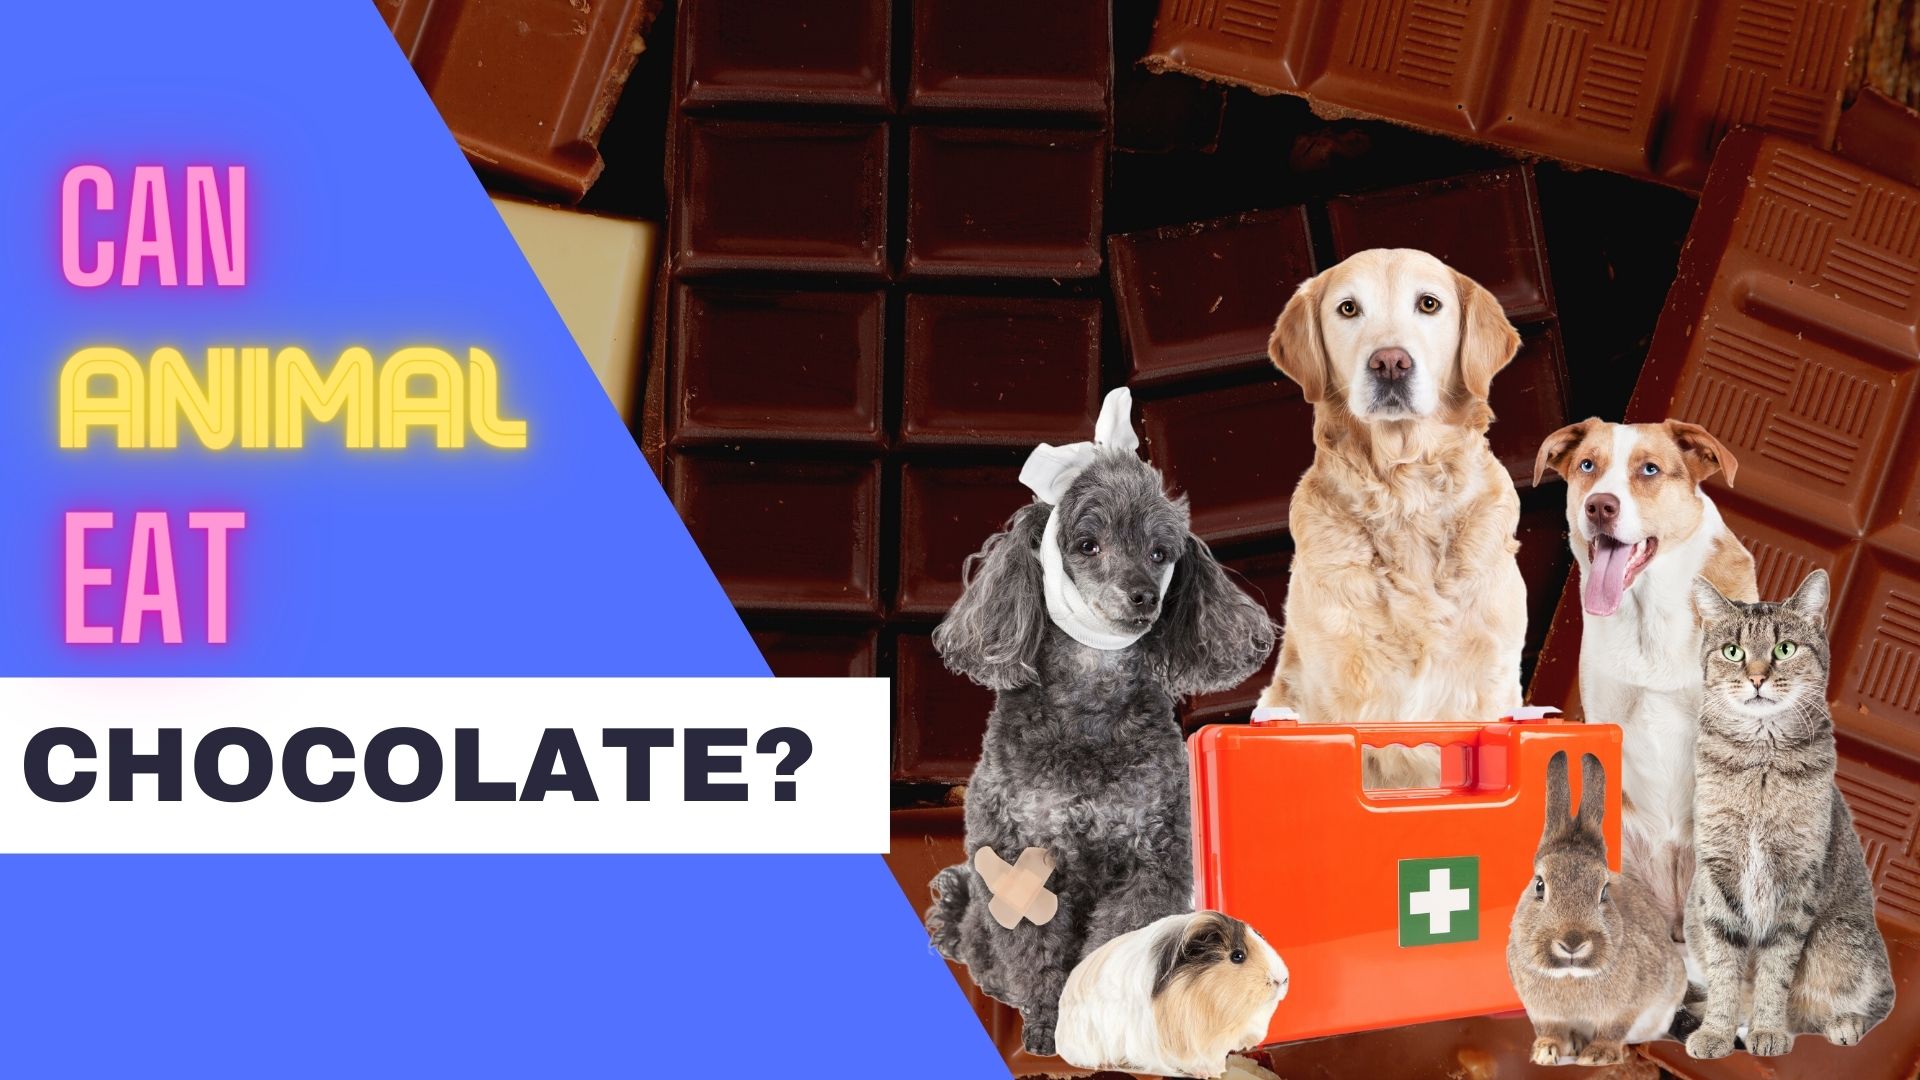 What Animals Can eat Chocolate?